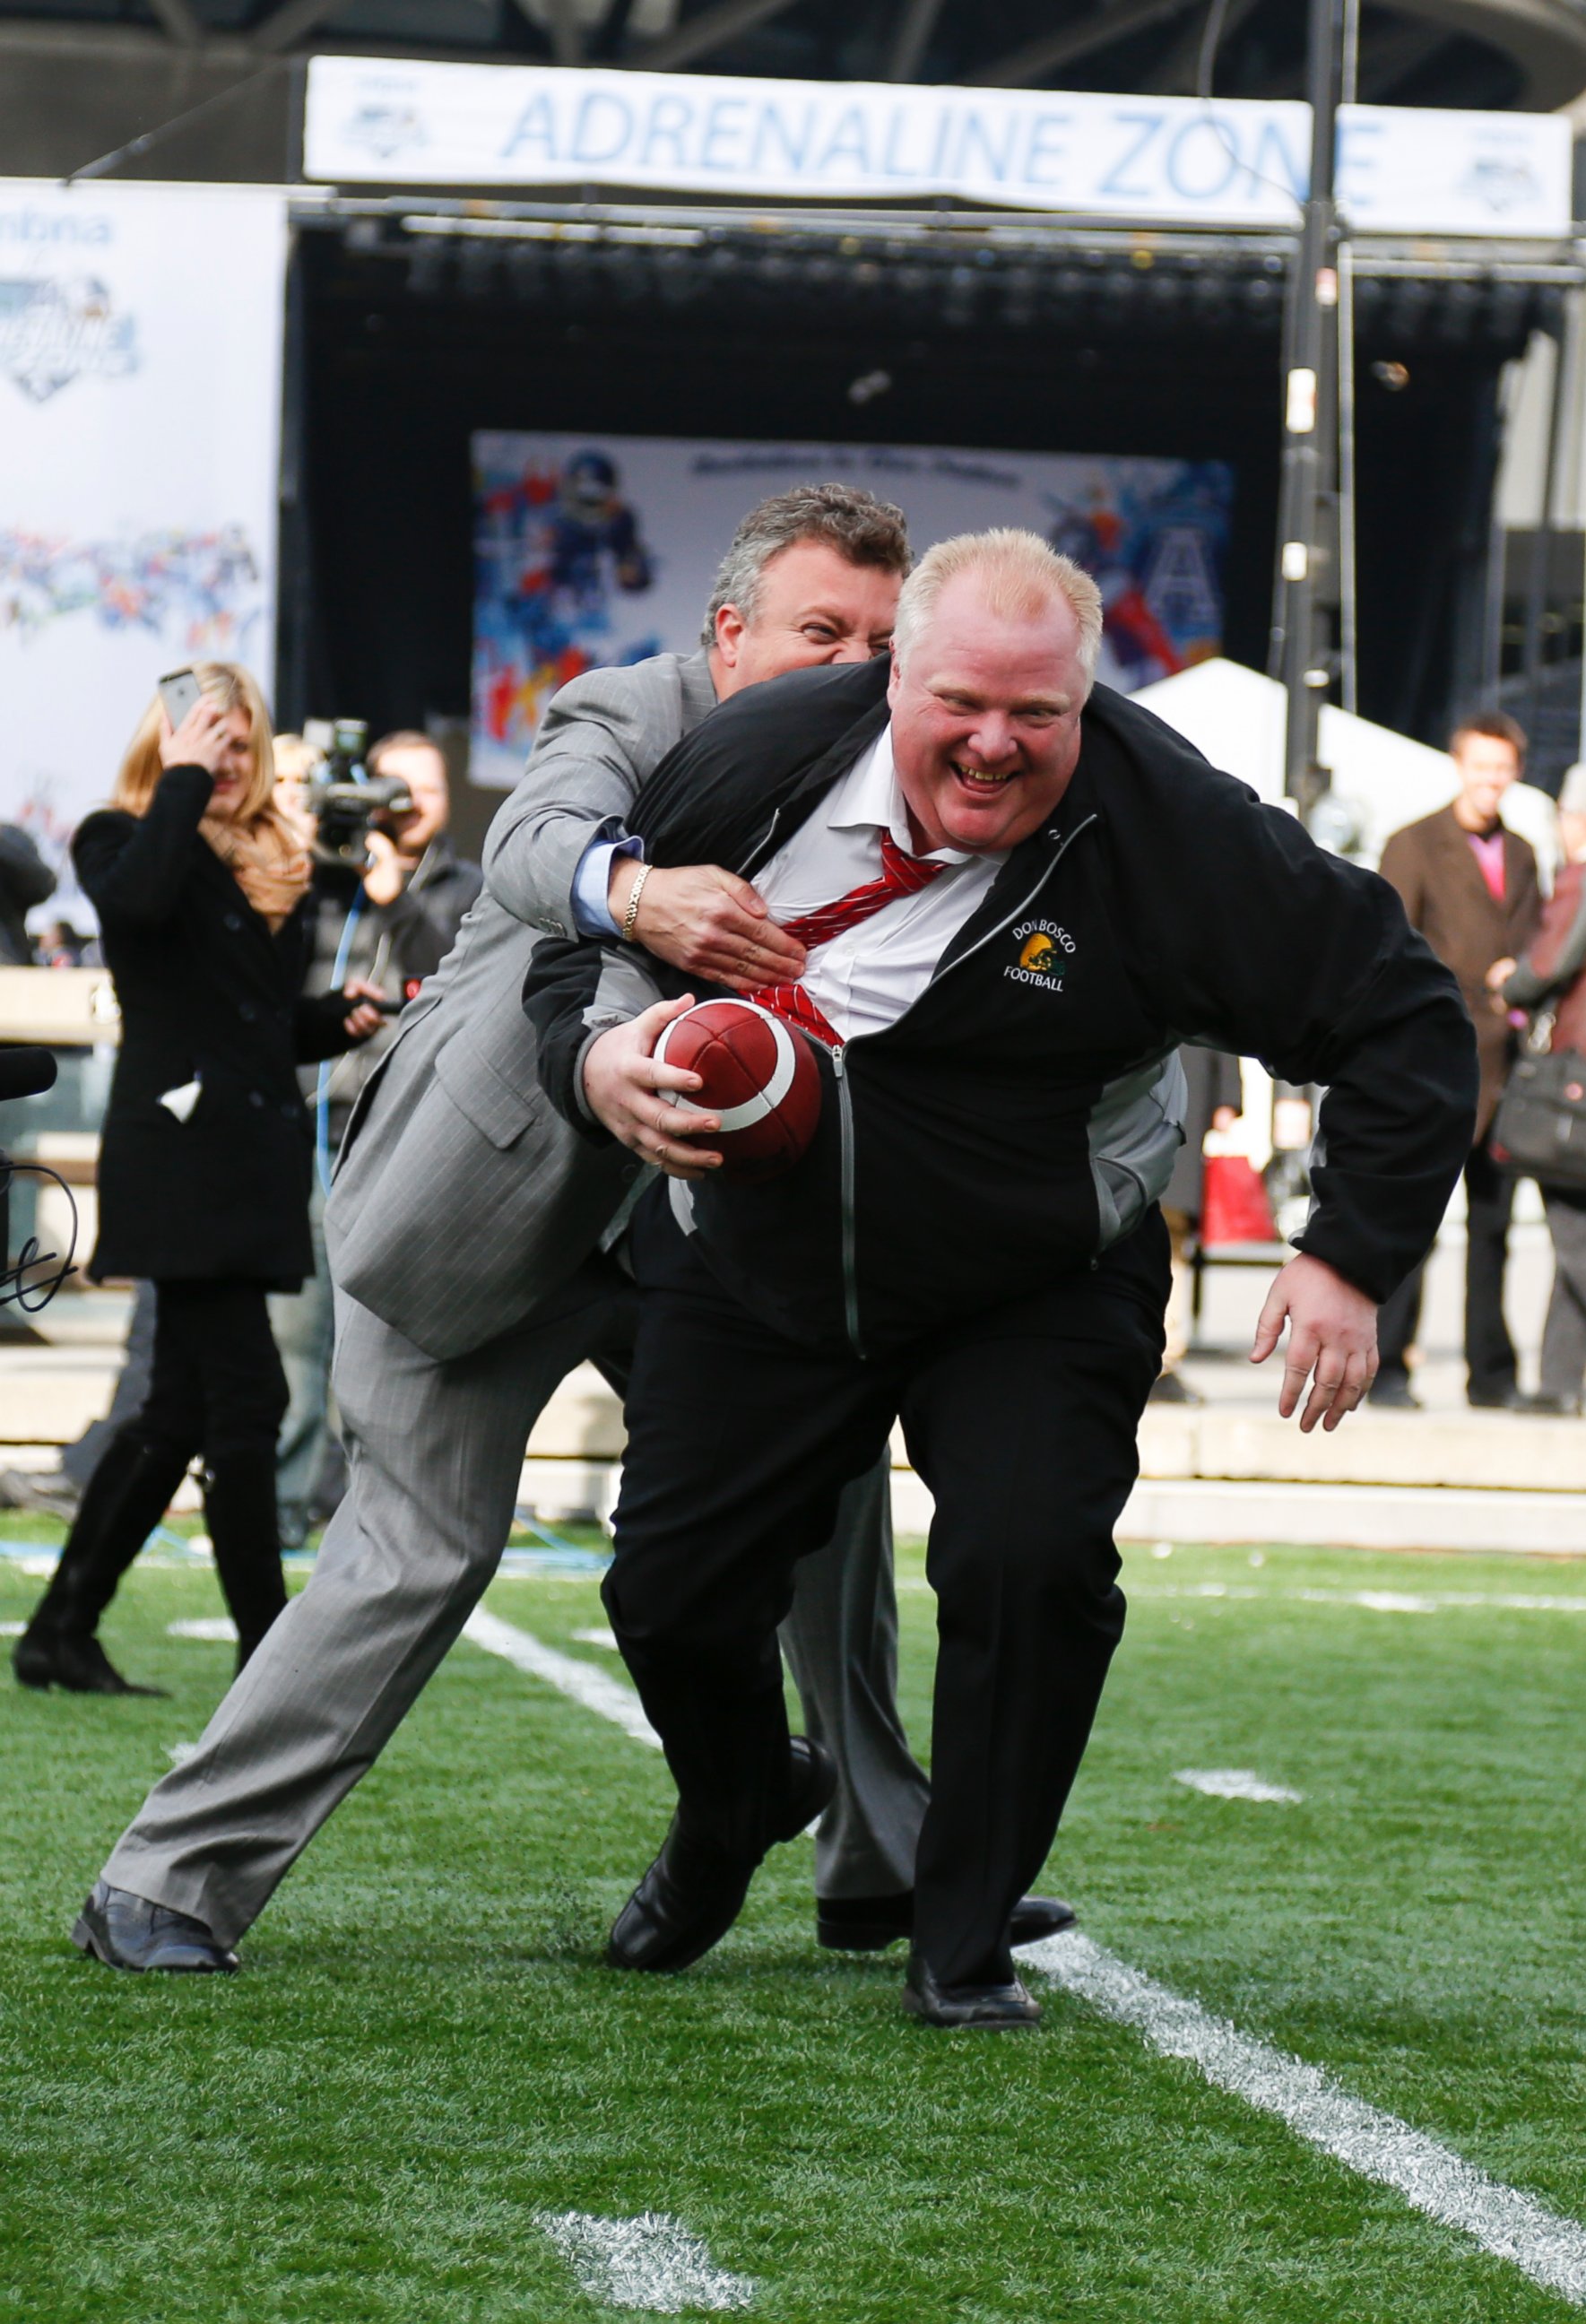 PHOTO: Mayor Rob Ford gets tackled by his Press-Secretary George Christopoulos during Grey Cup celebrations at the CFL Adrenaline Zone at Nathan Phillips Square, Nov. 20, 2012 in Toronto, Canada. 